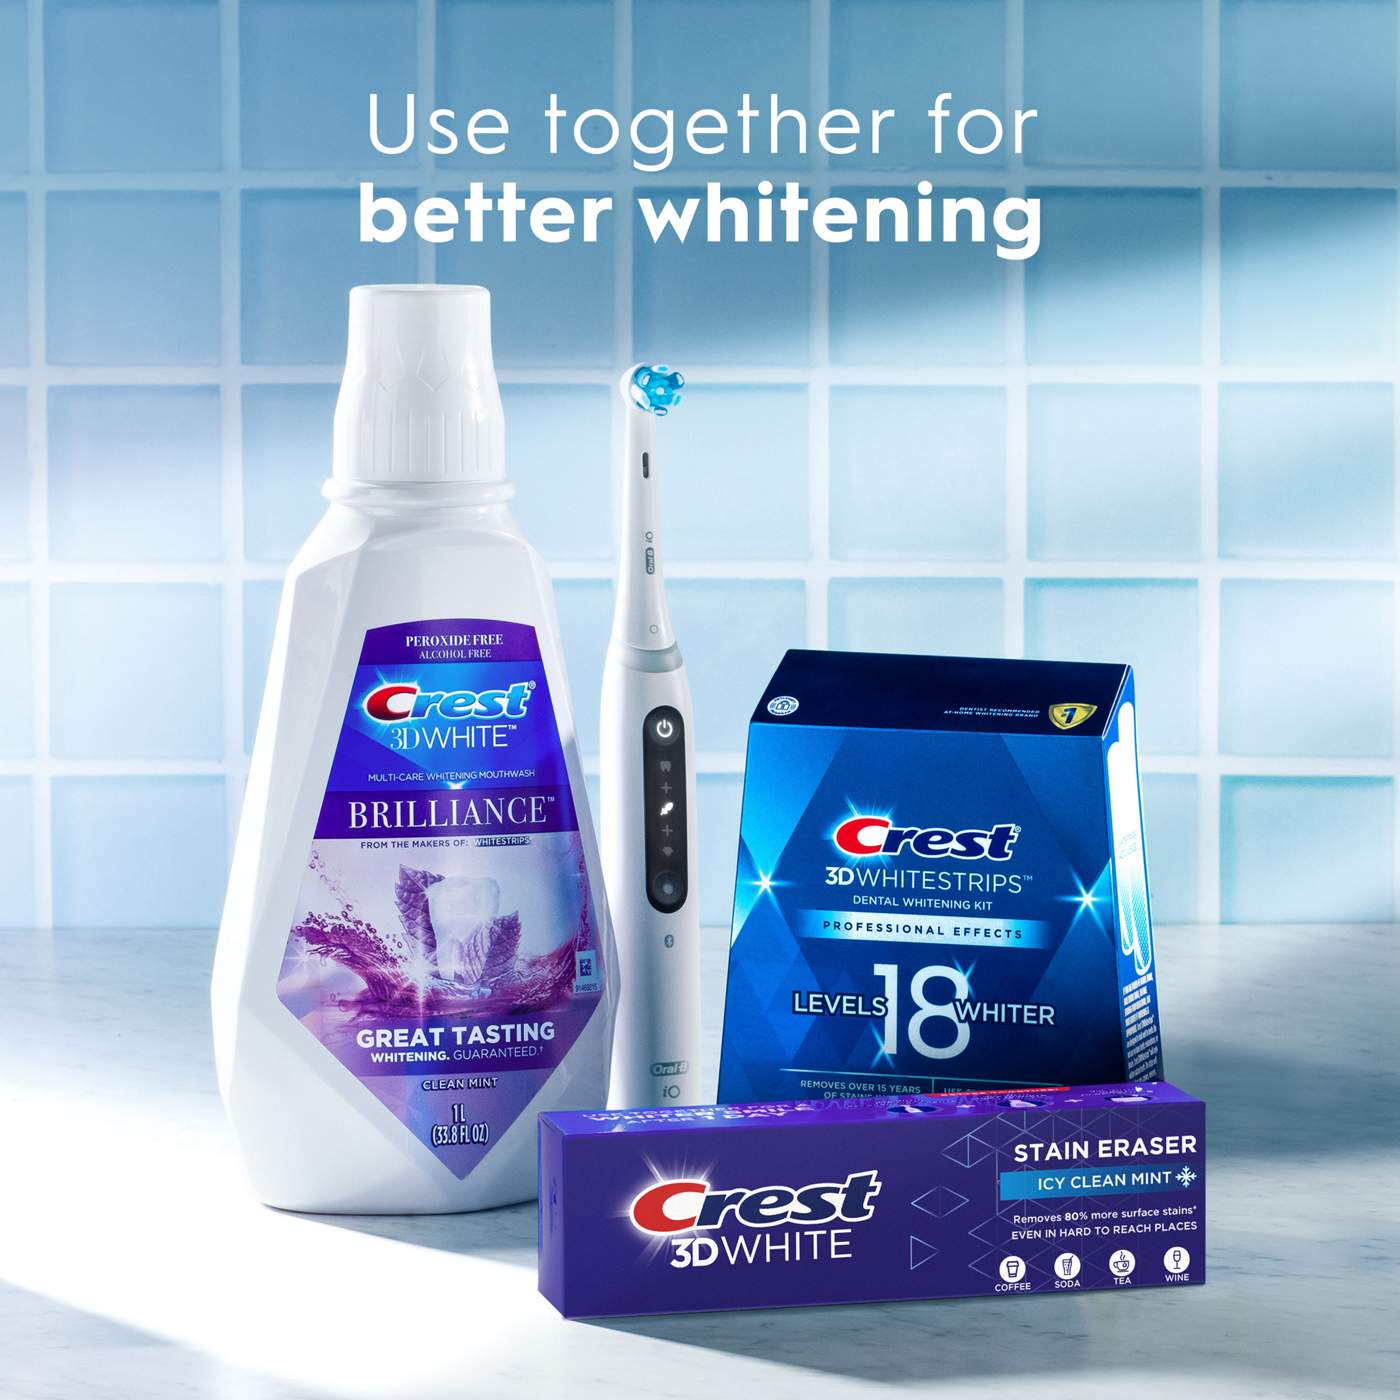 Crest 3D White Stain Eraser Toothpaste - Icy Clean Mint; image 5 of 6